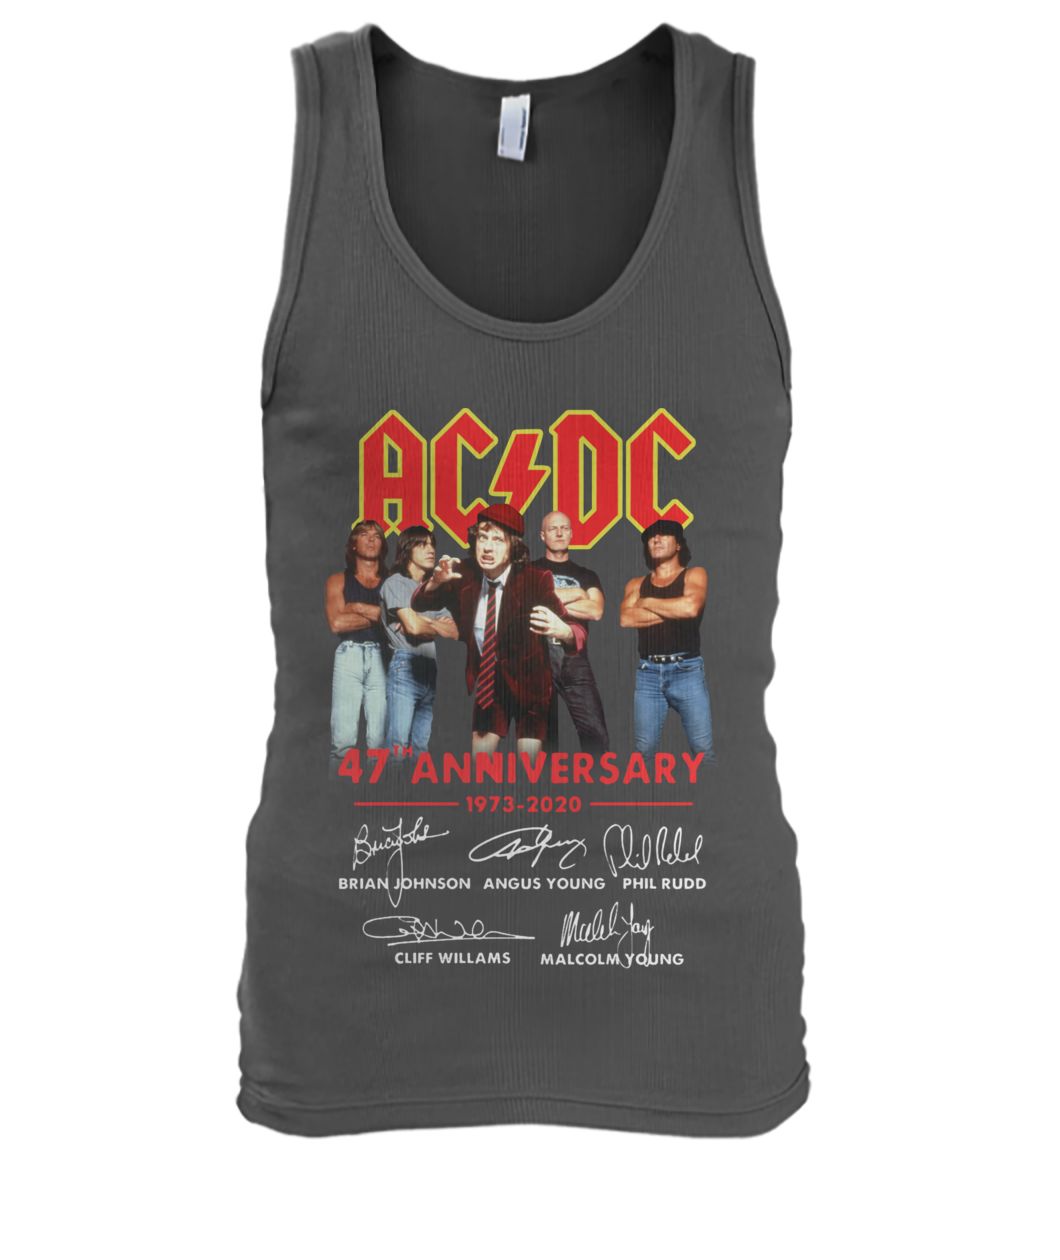 ACDC band 47 anniversary 1973-2020 signatures men's tank top